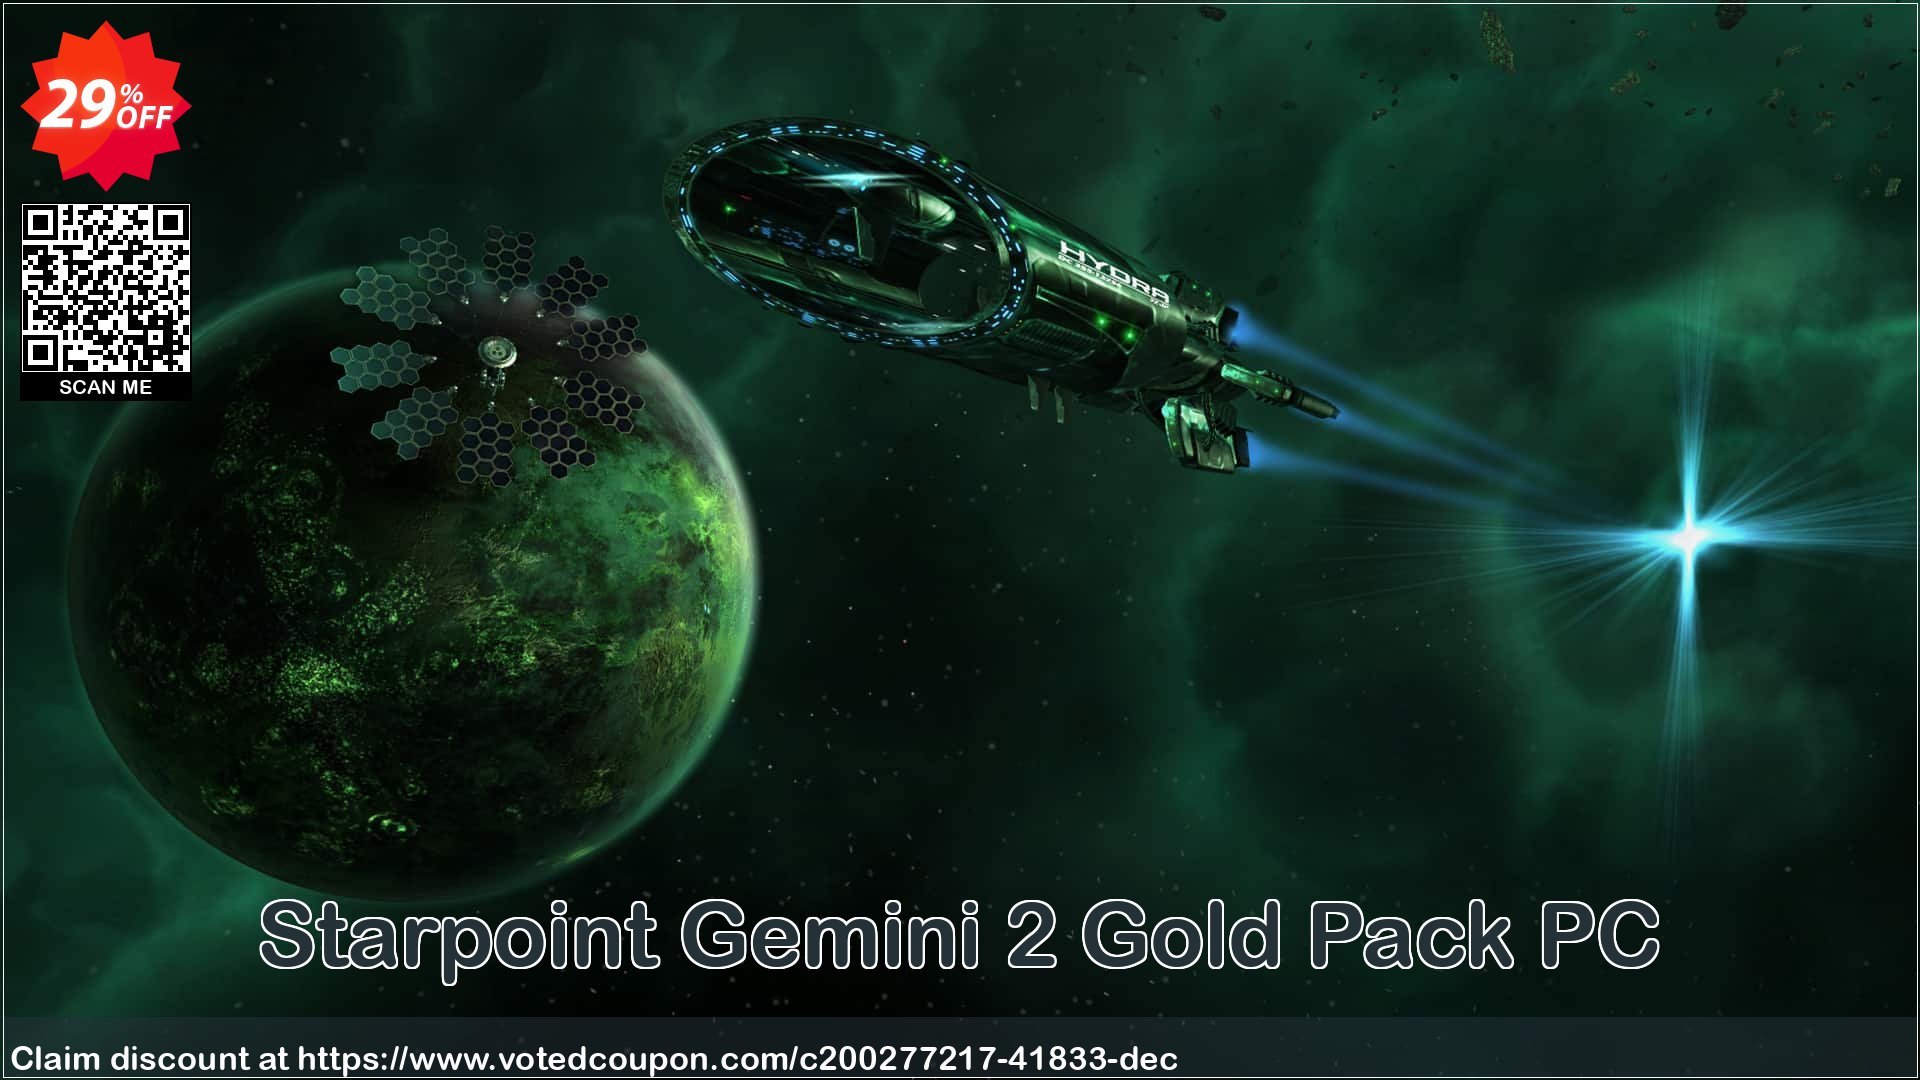 Starpoint Gemini 2 Gold Pack PC Coupon Code May 2024, 29% OFF - VotedCoupon